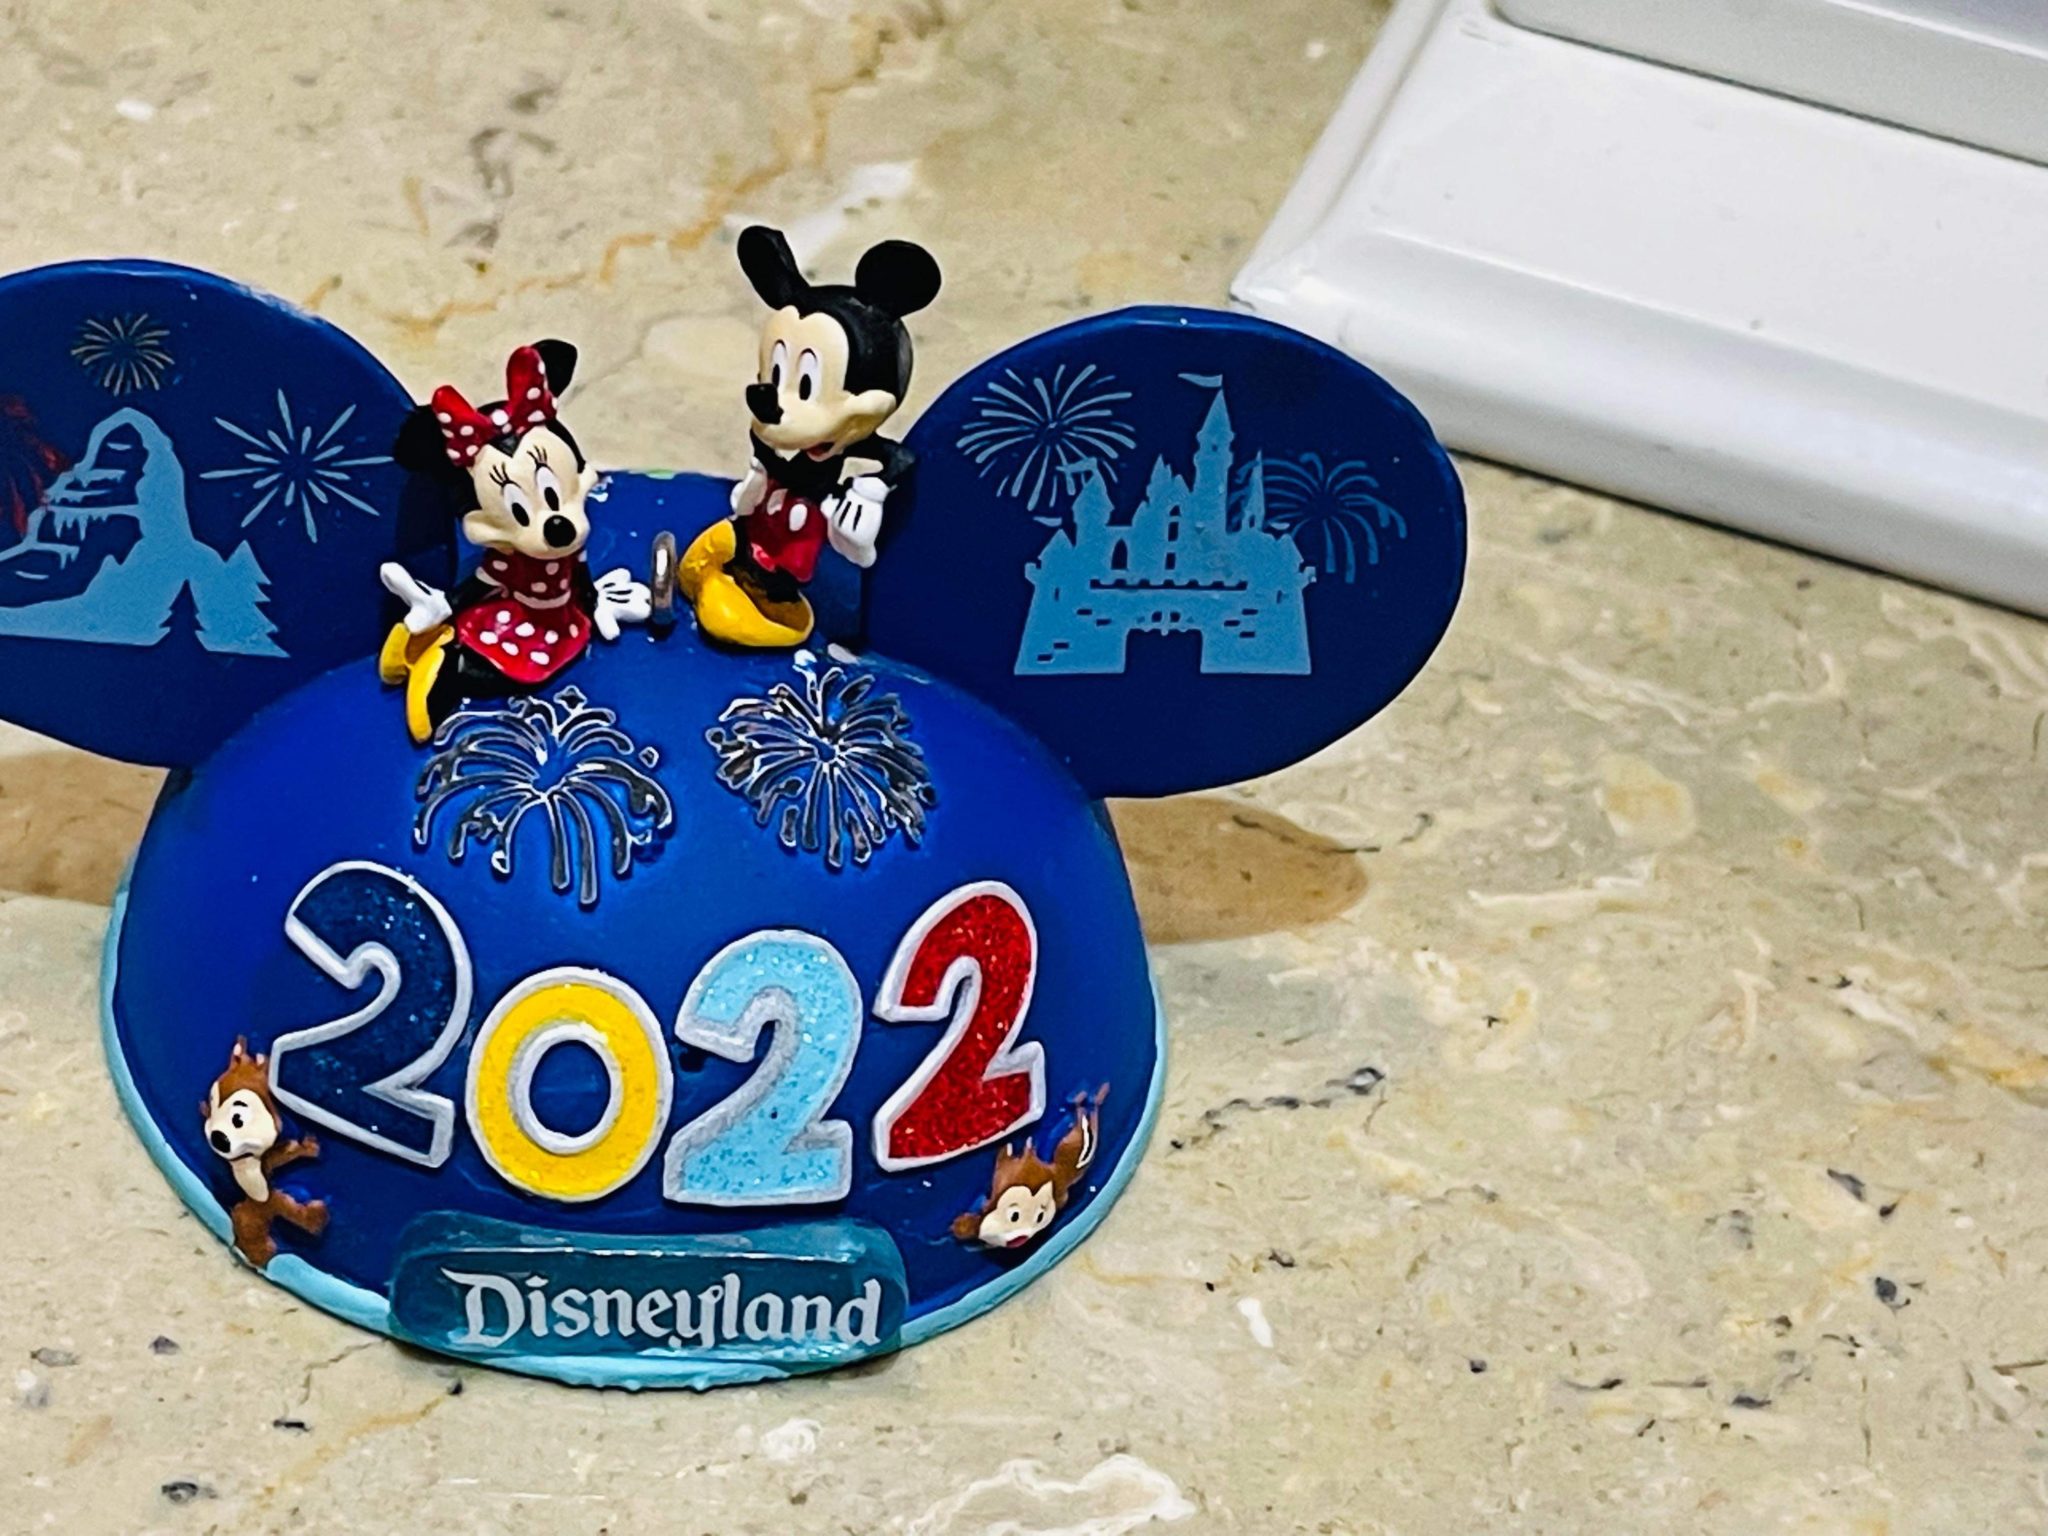 New 2022 Holiday Ornament Spotted at World of Disney!